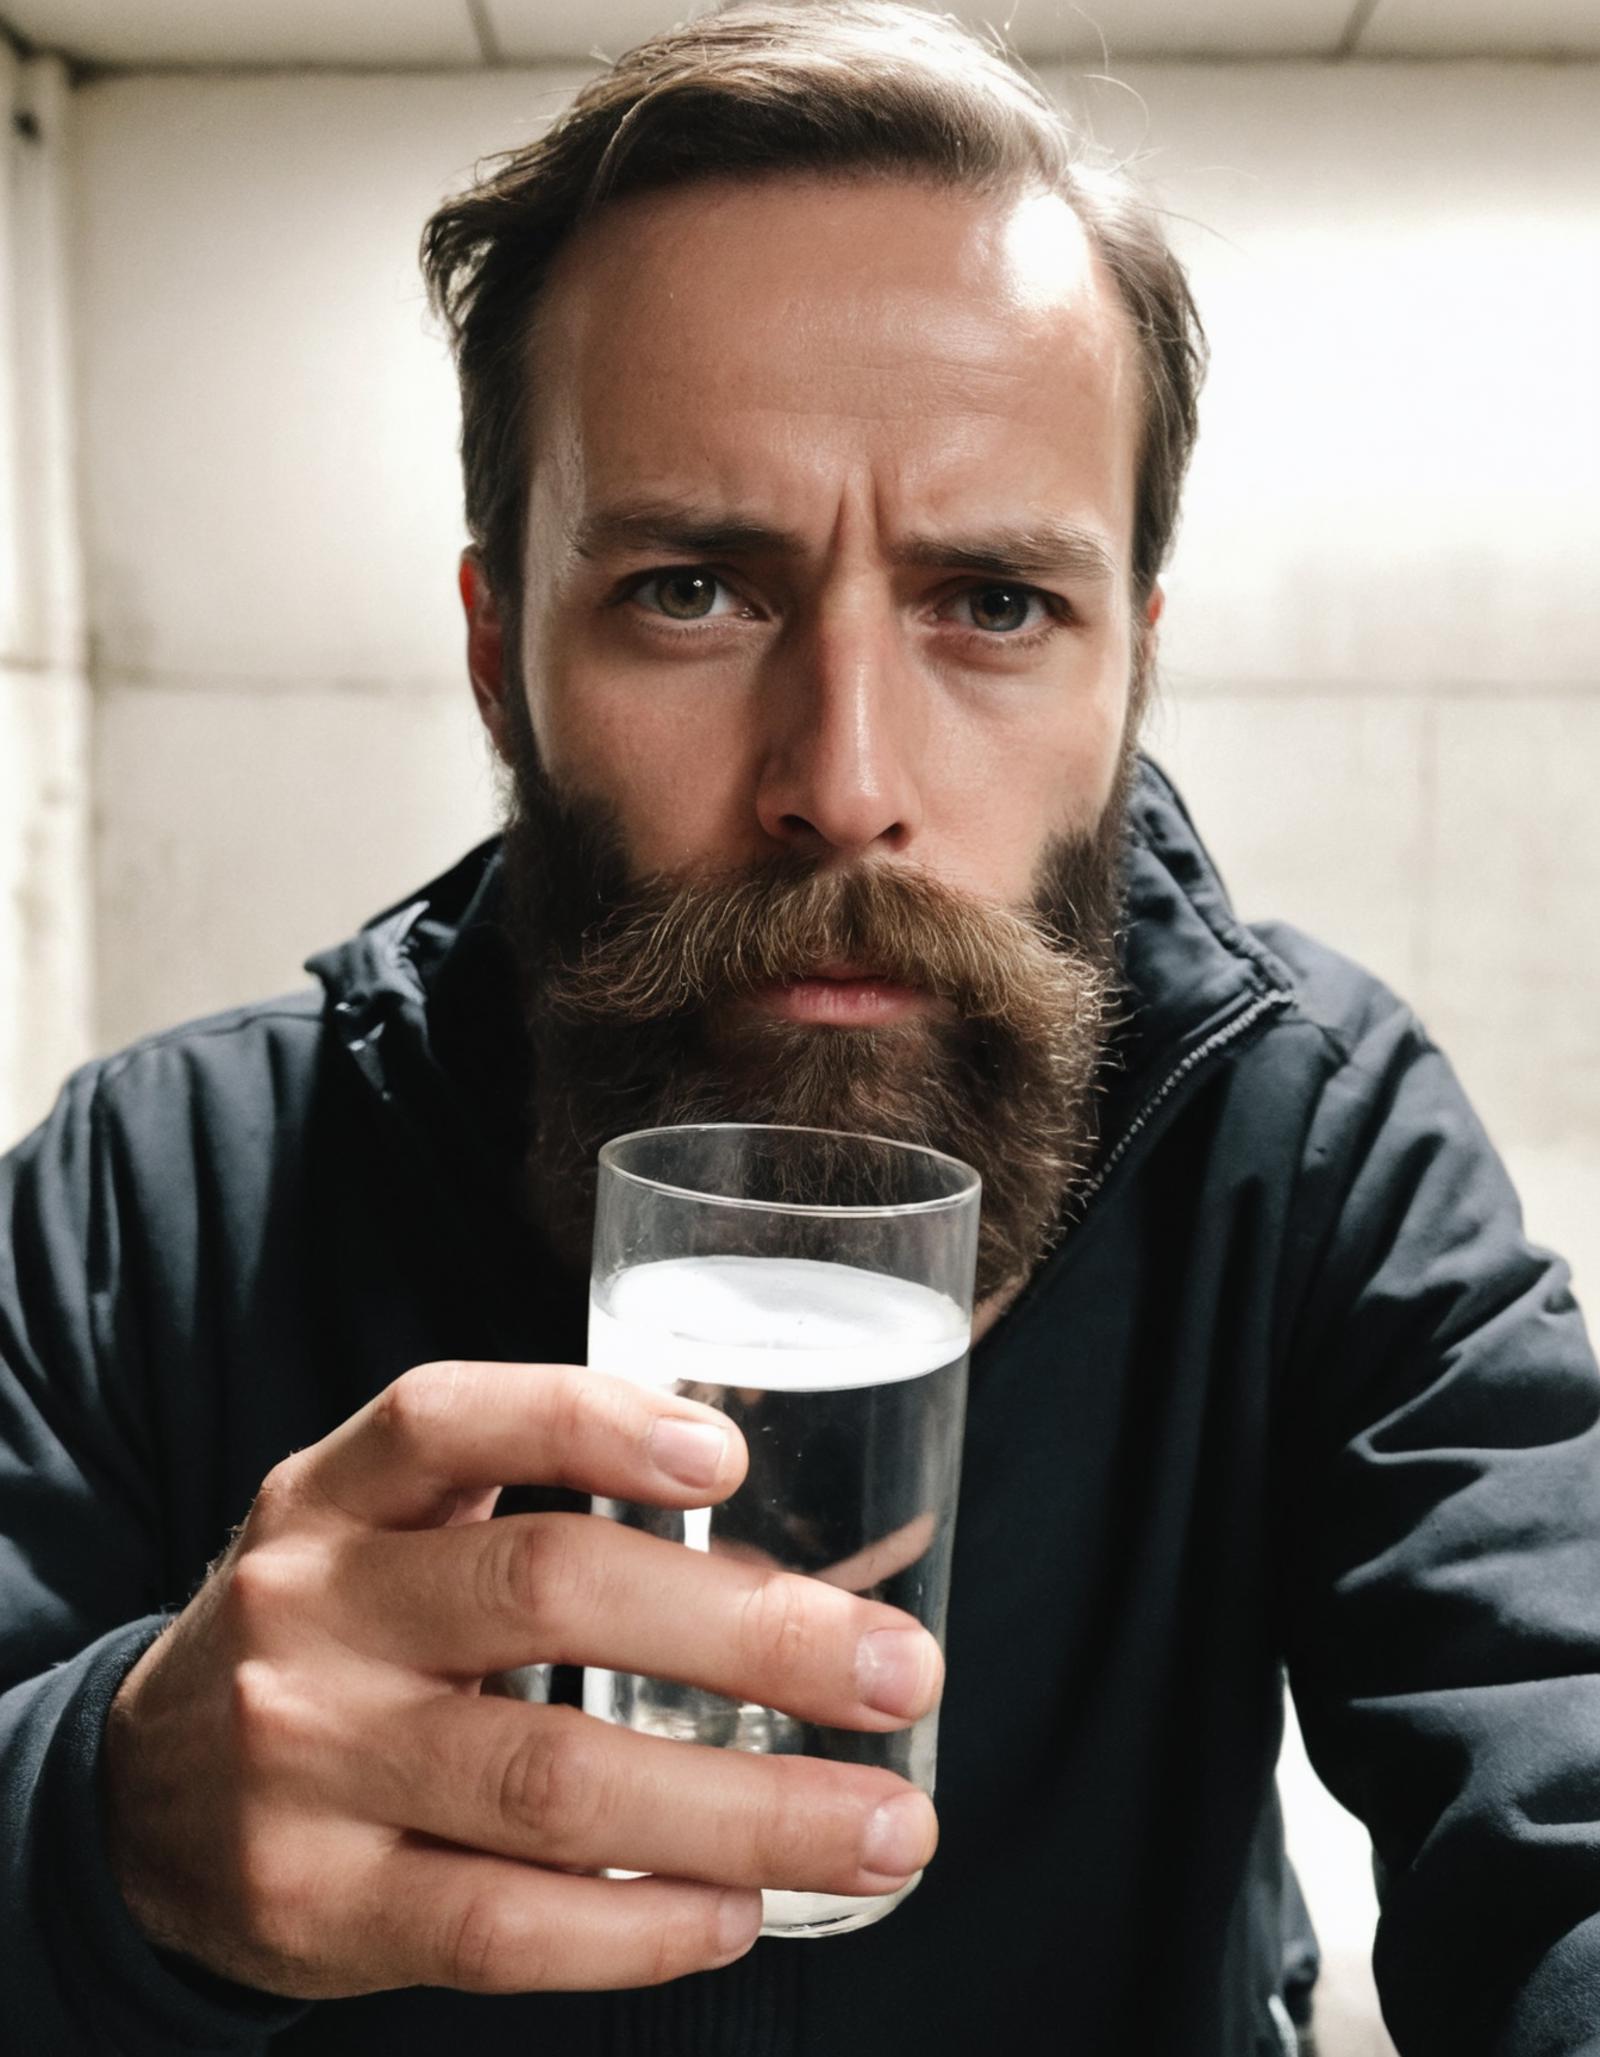 A man with a beard holding a glass of water.